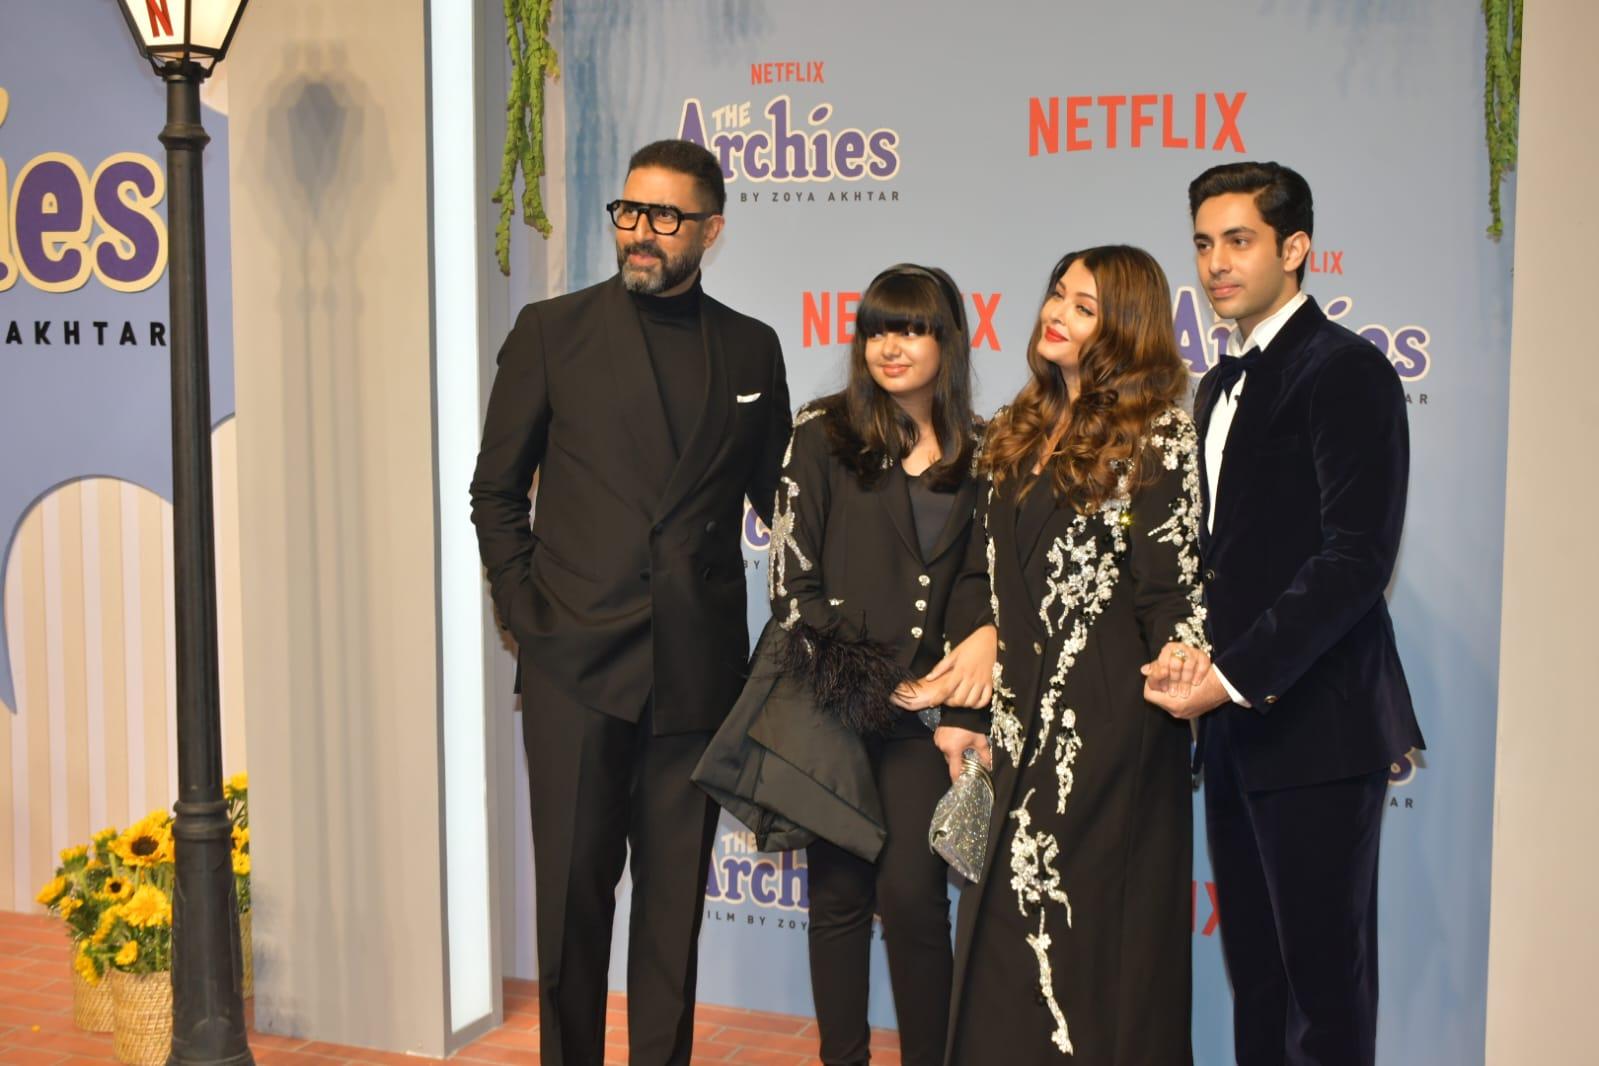 The Bachchan family were in full support at Agastya Nanda's 'The Archies premiere launch